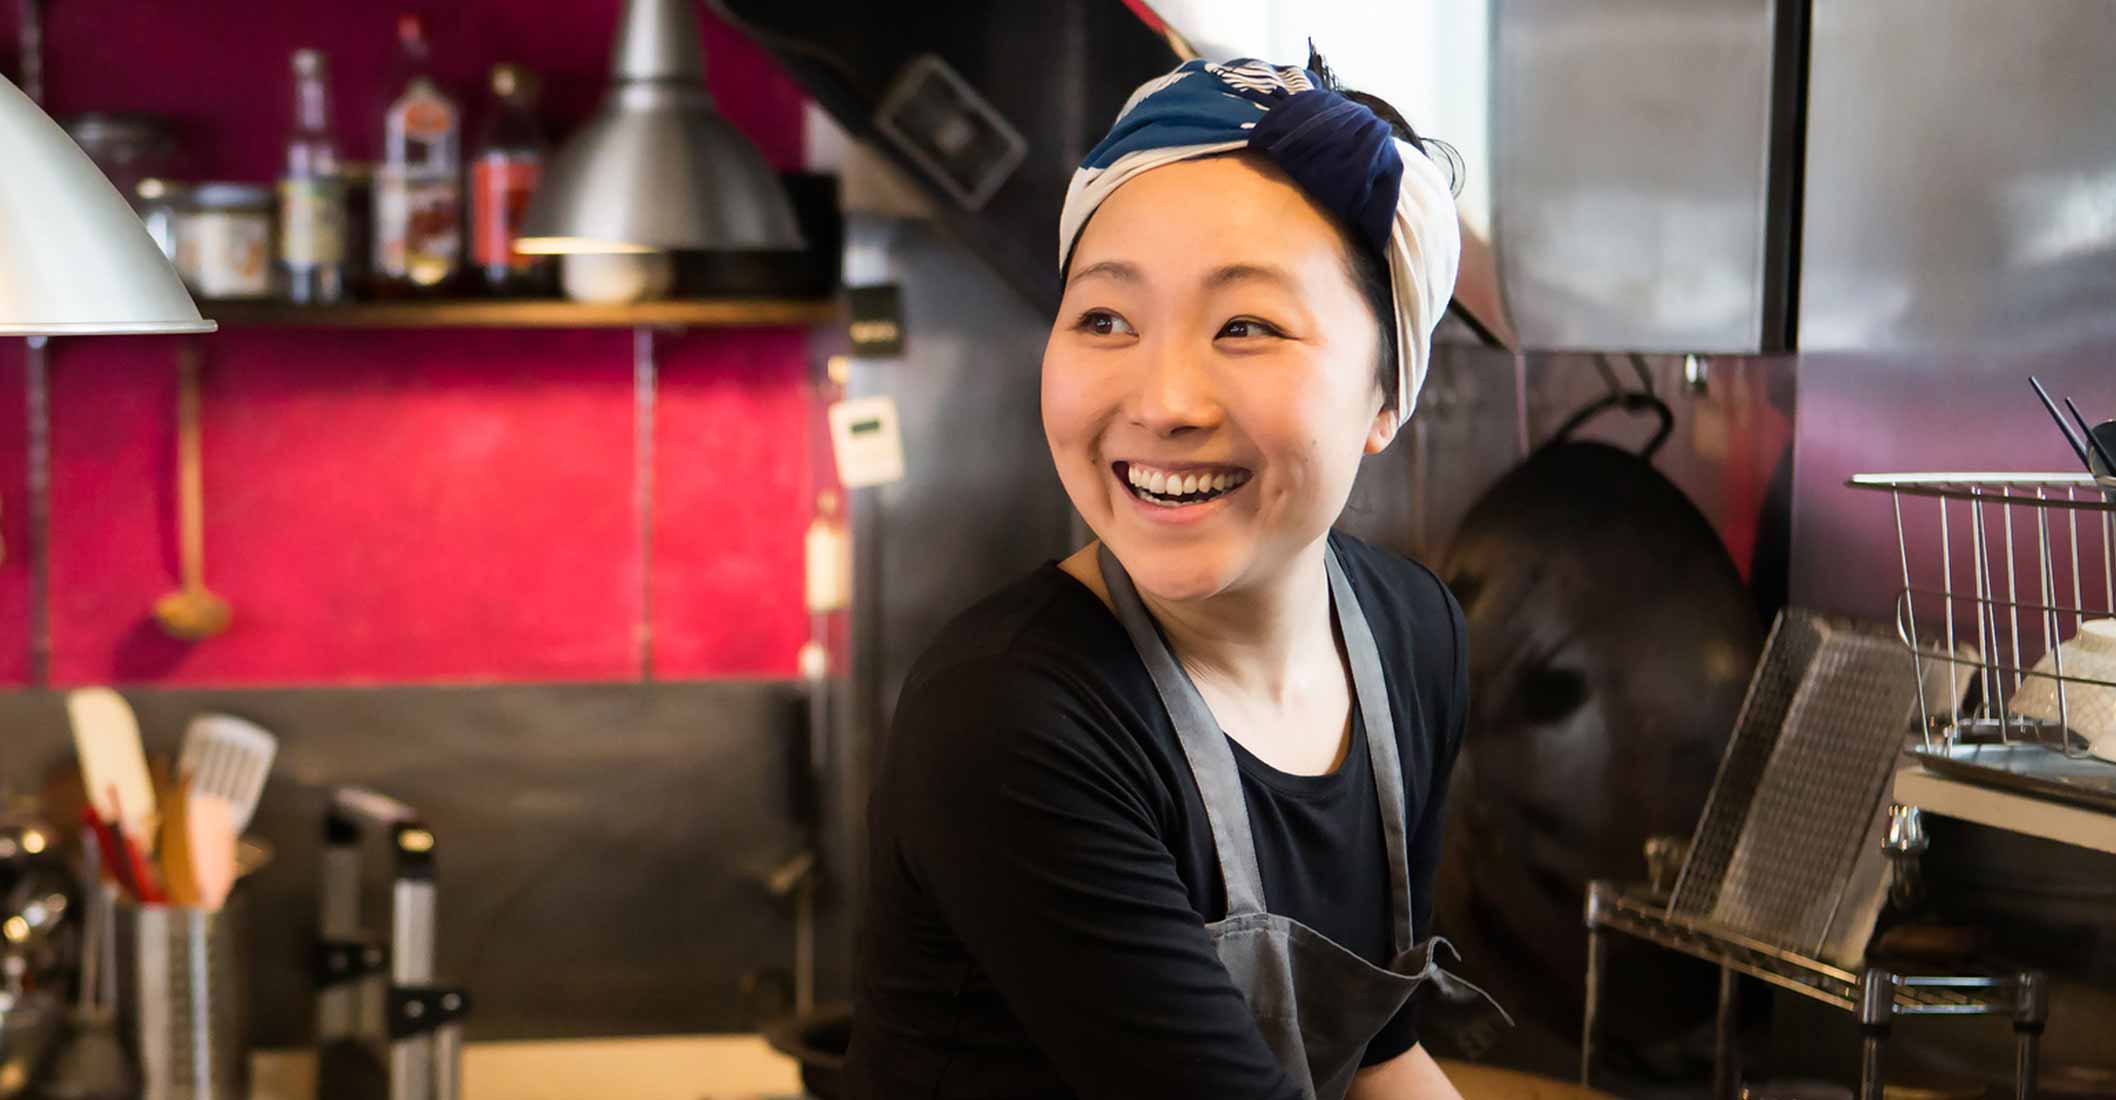 Meet friendly locals like this Japanese chef when you take a tailor-made holiday with Alfred&.